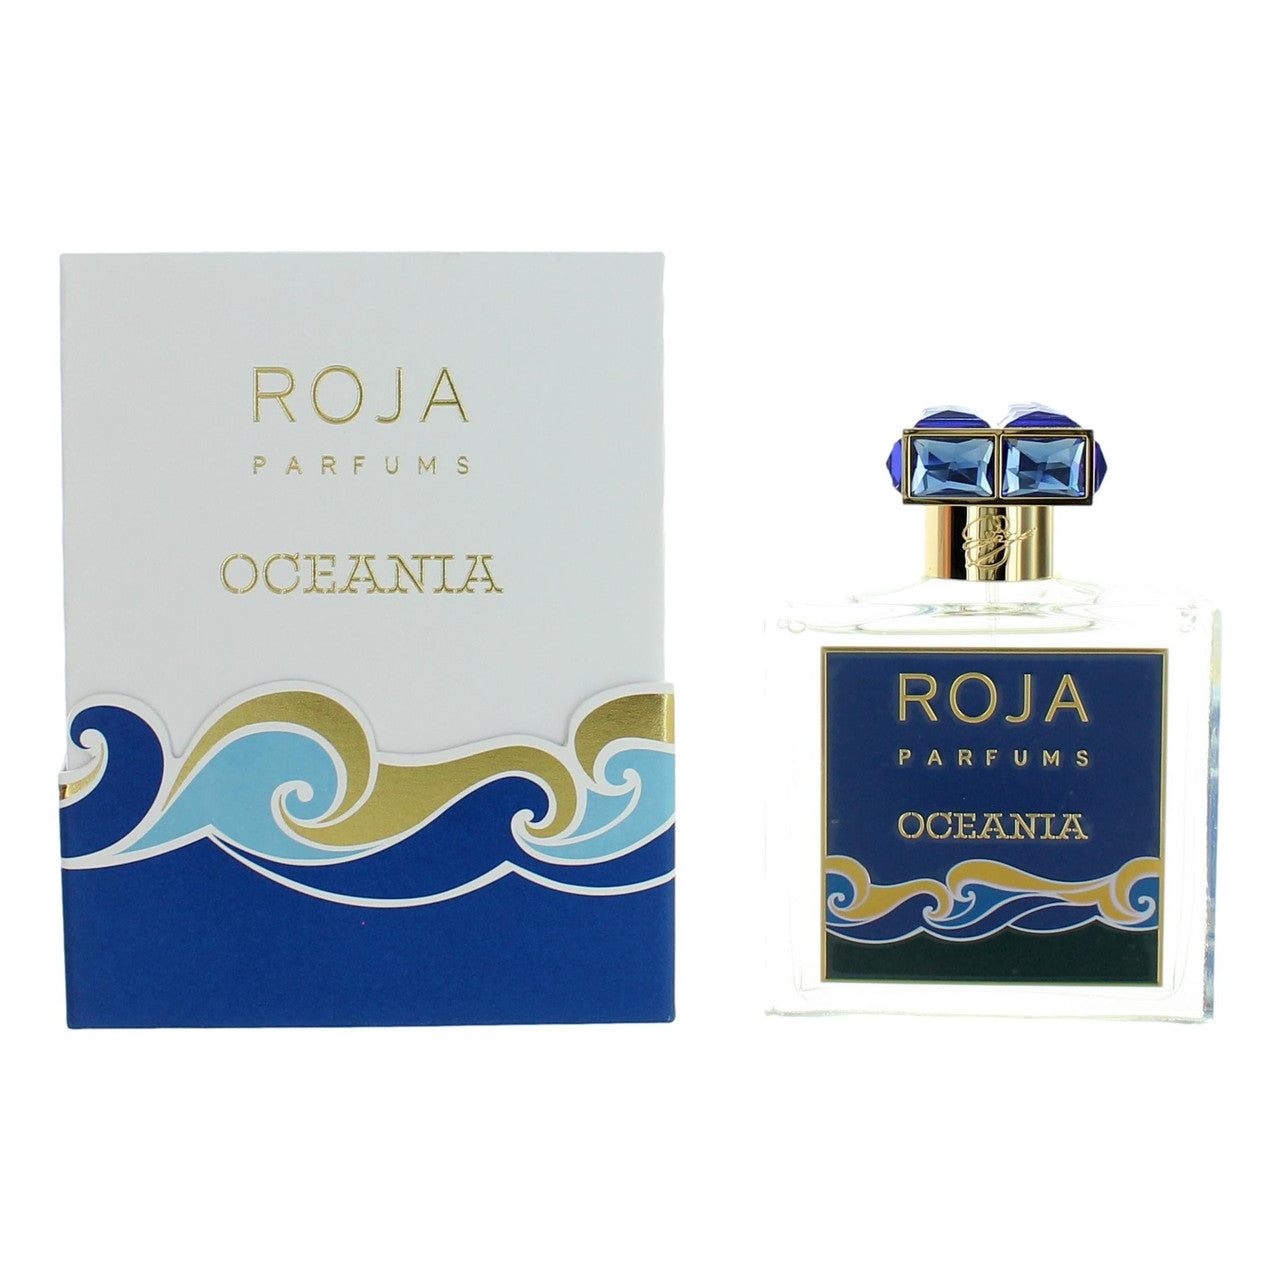 3.4 oz bottle of Oceania by Roja Parfums